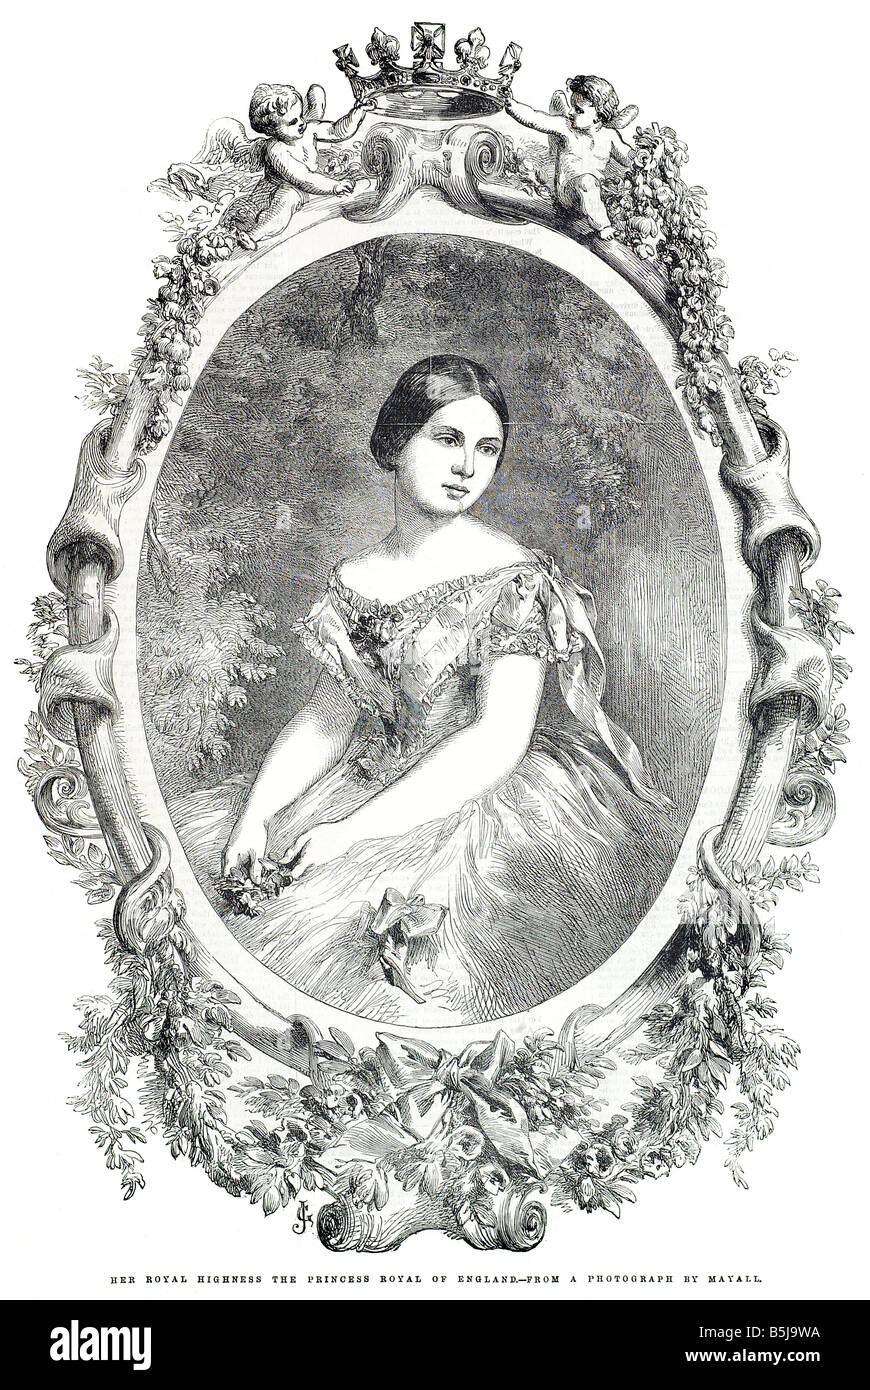 Her royal highness the princess royal of England from a photograph by Mayall May 24 1856 The Illustrated London News Stock Photo